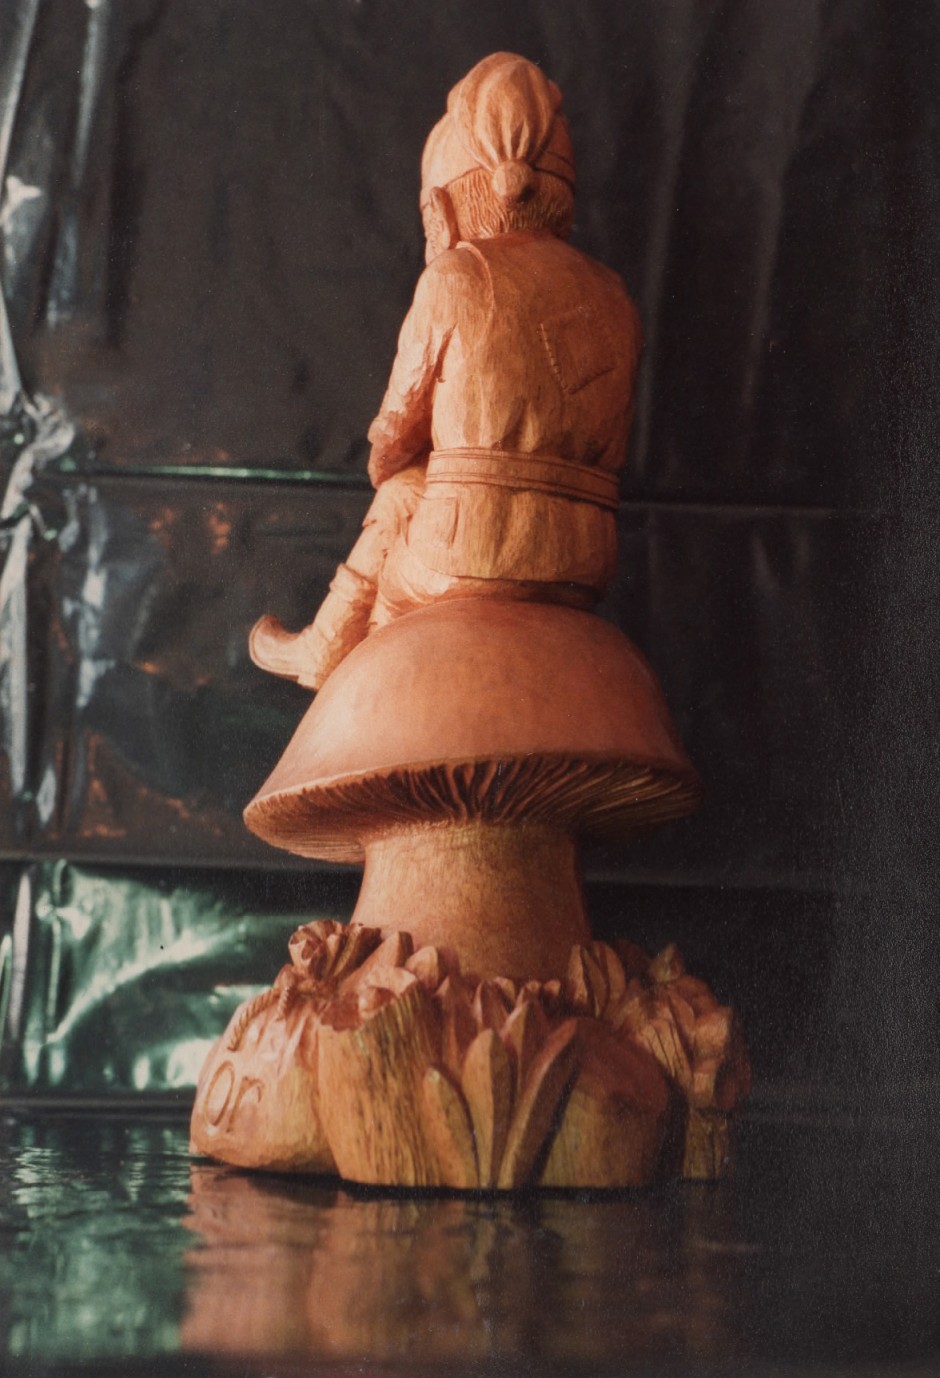 Rear view of the gnome by traditional woodcarver, Jose Sarabia - jose sarabia woodcarver gnome on a toadstool